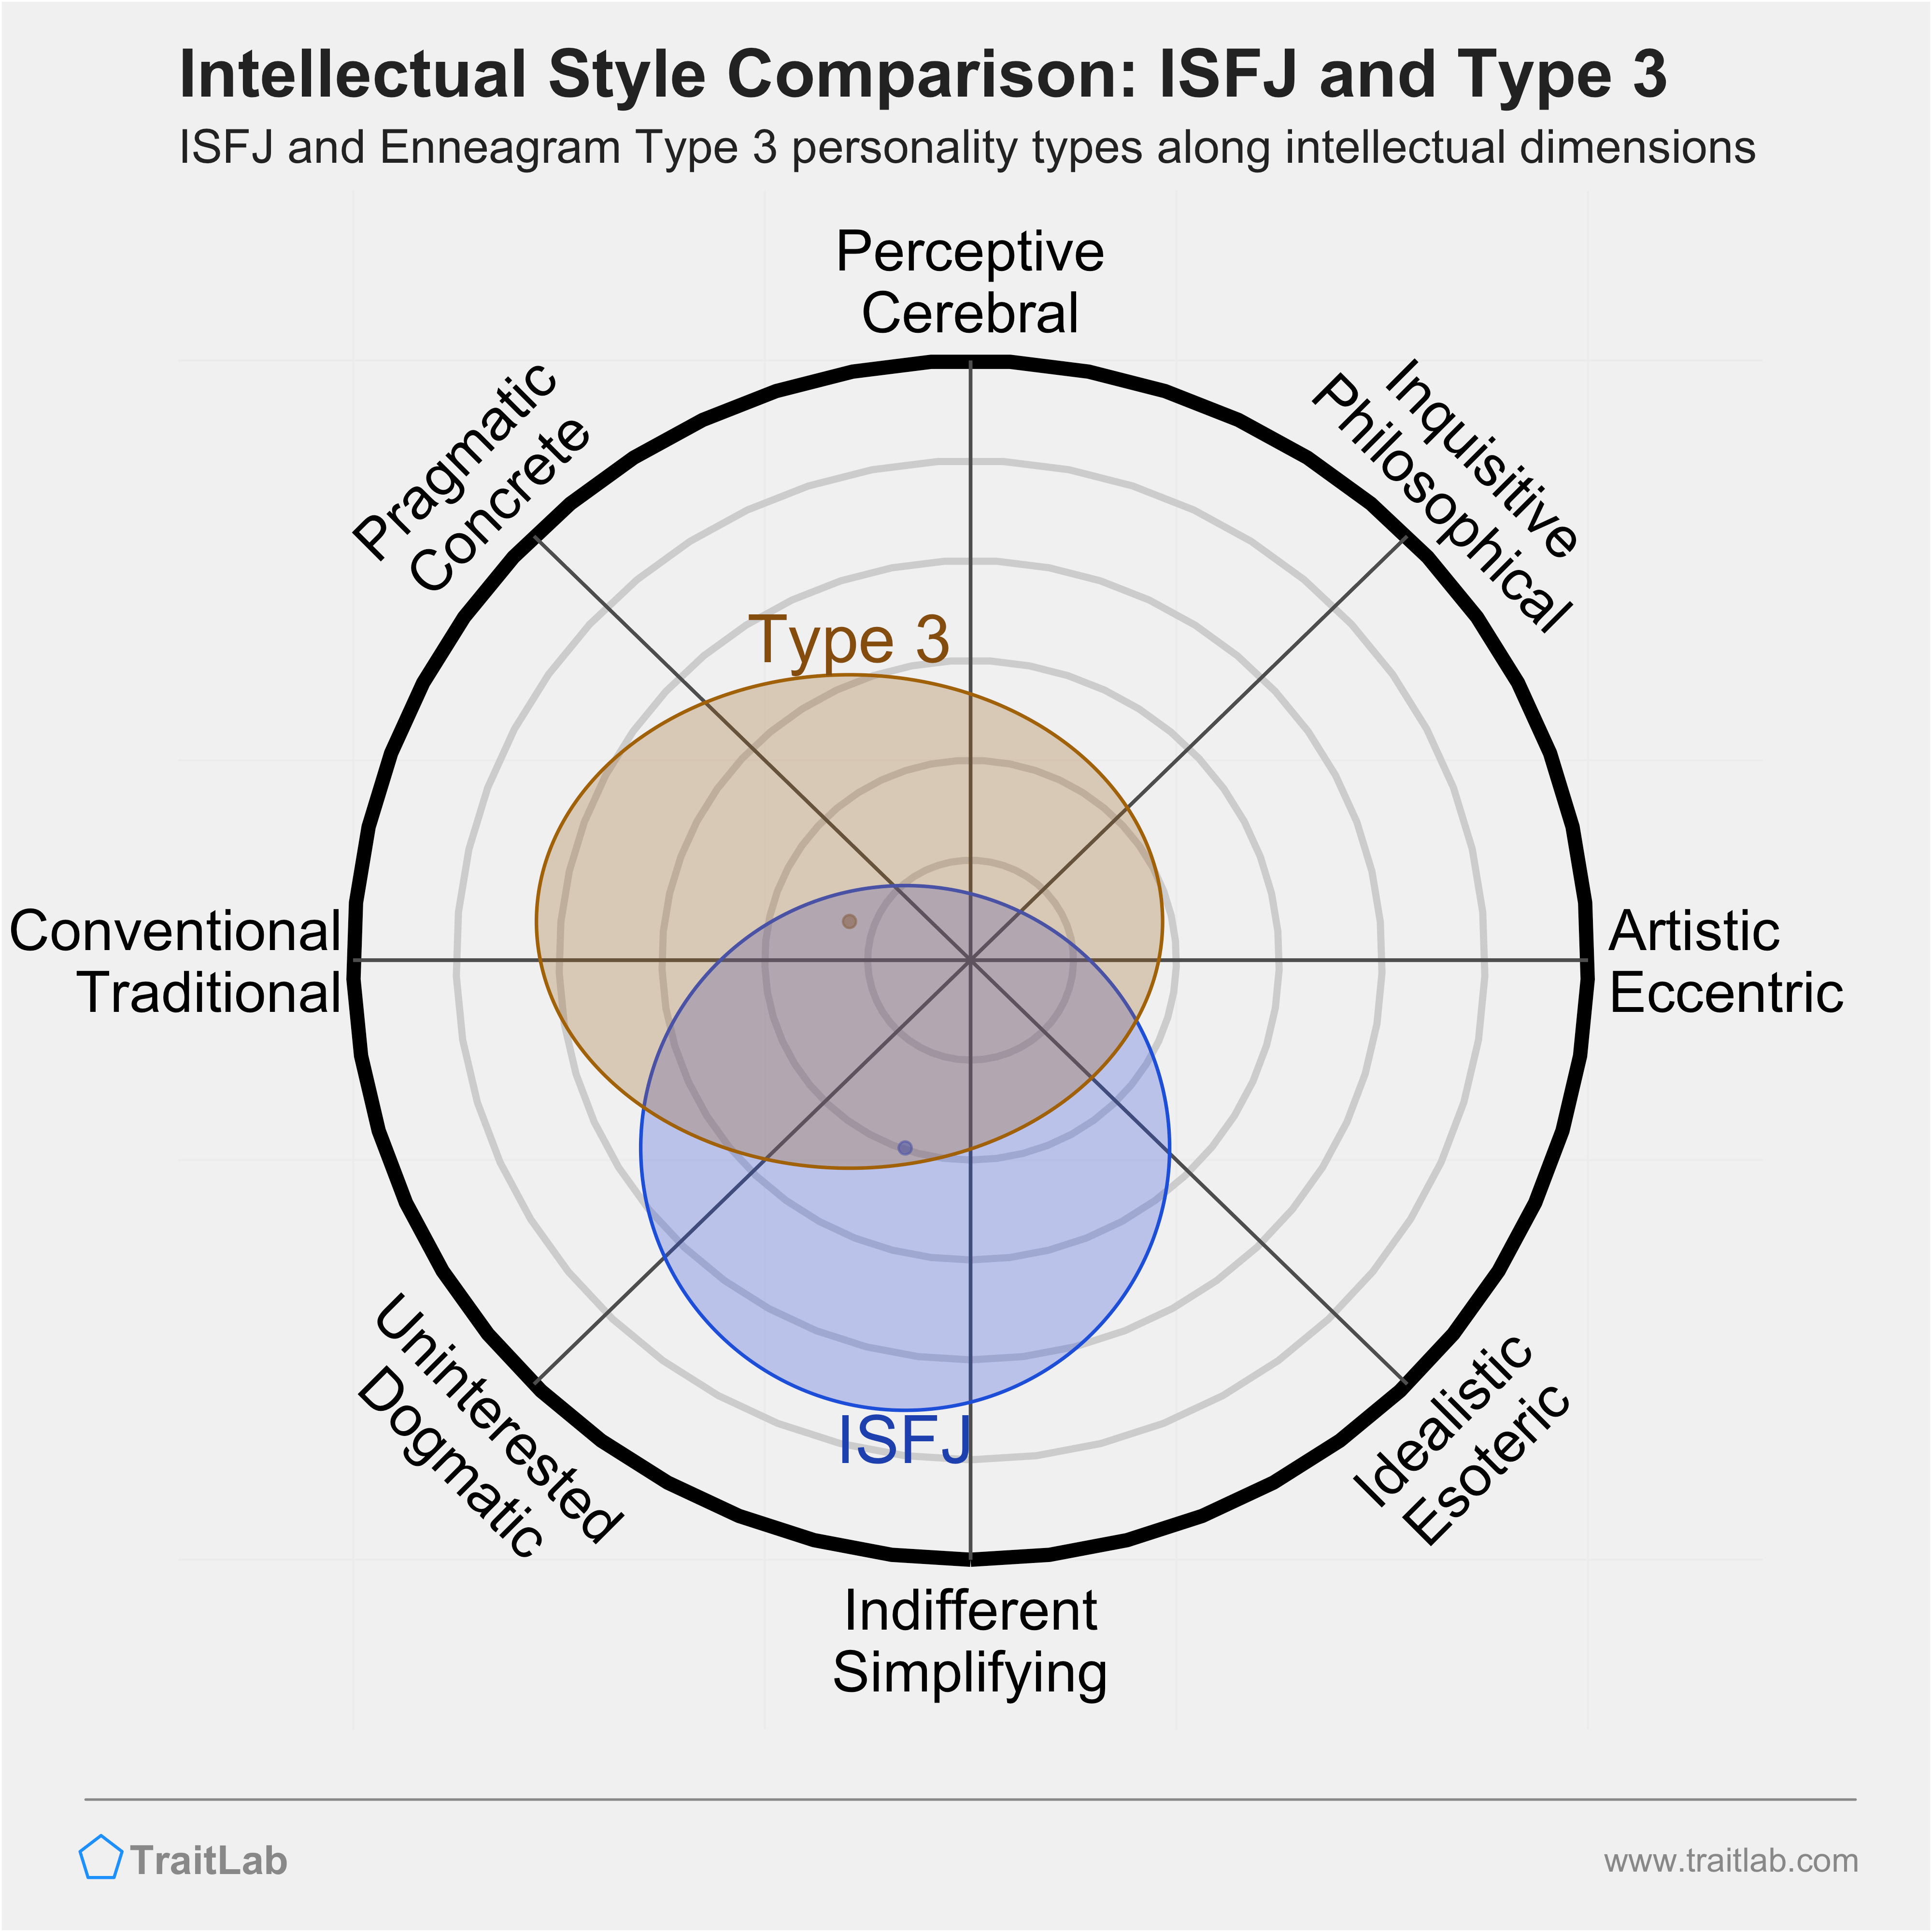 ISFJ and Type 3 comparison across intellectual dimensions